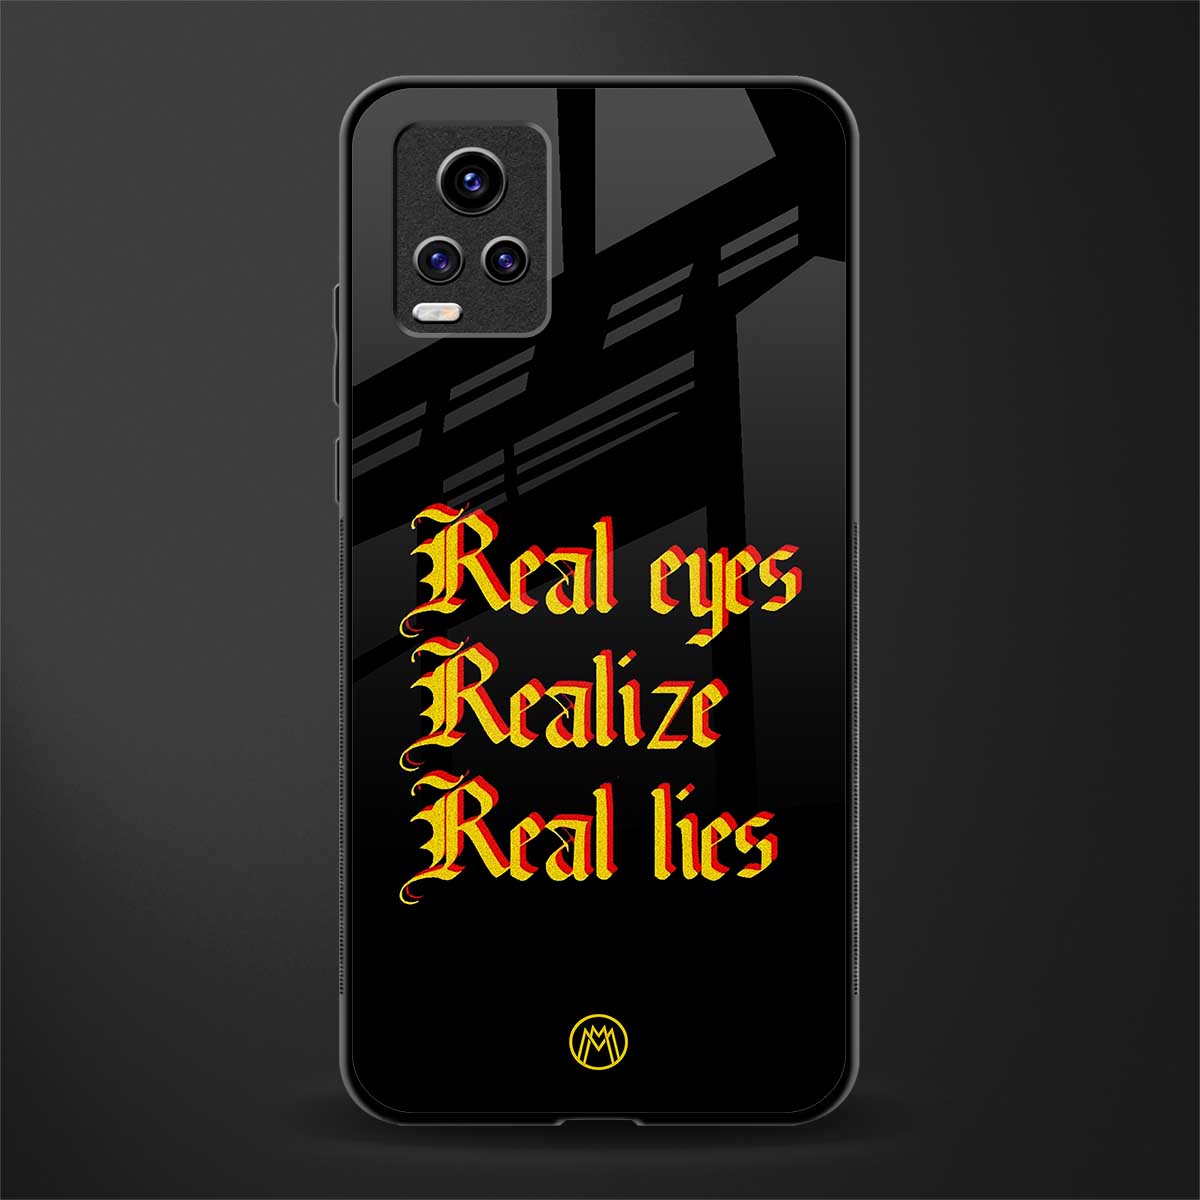 real eyes realize real lies quote back phone cover | glass case for vivo y73